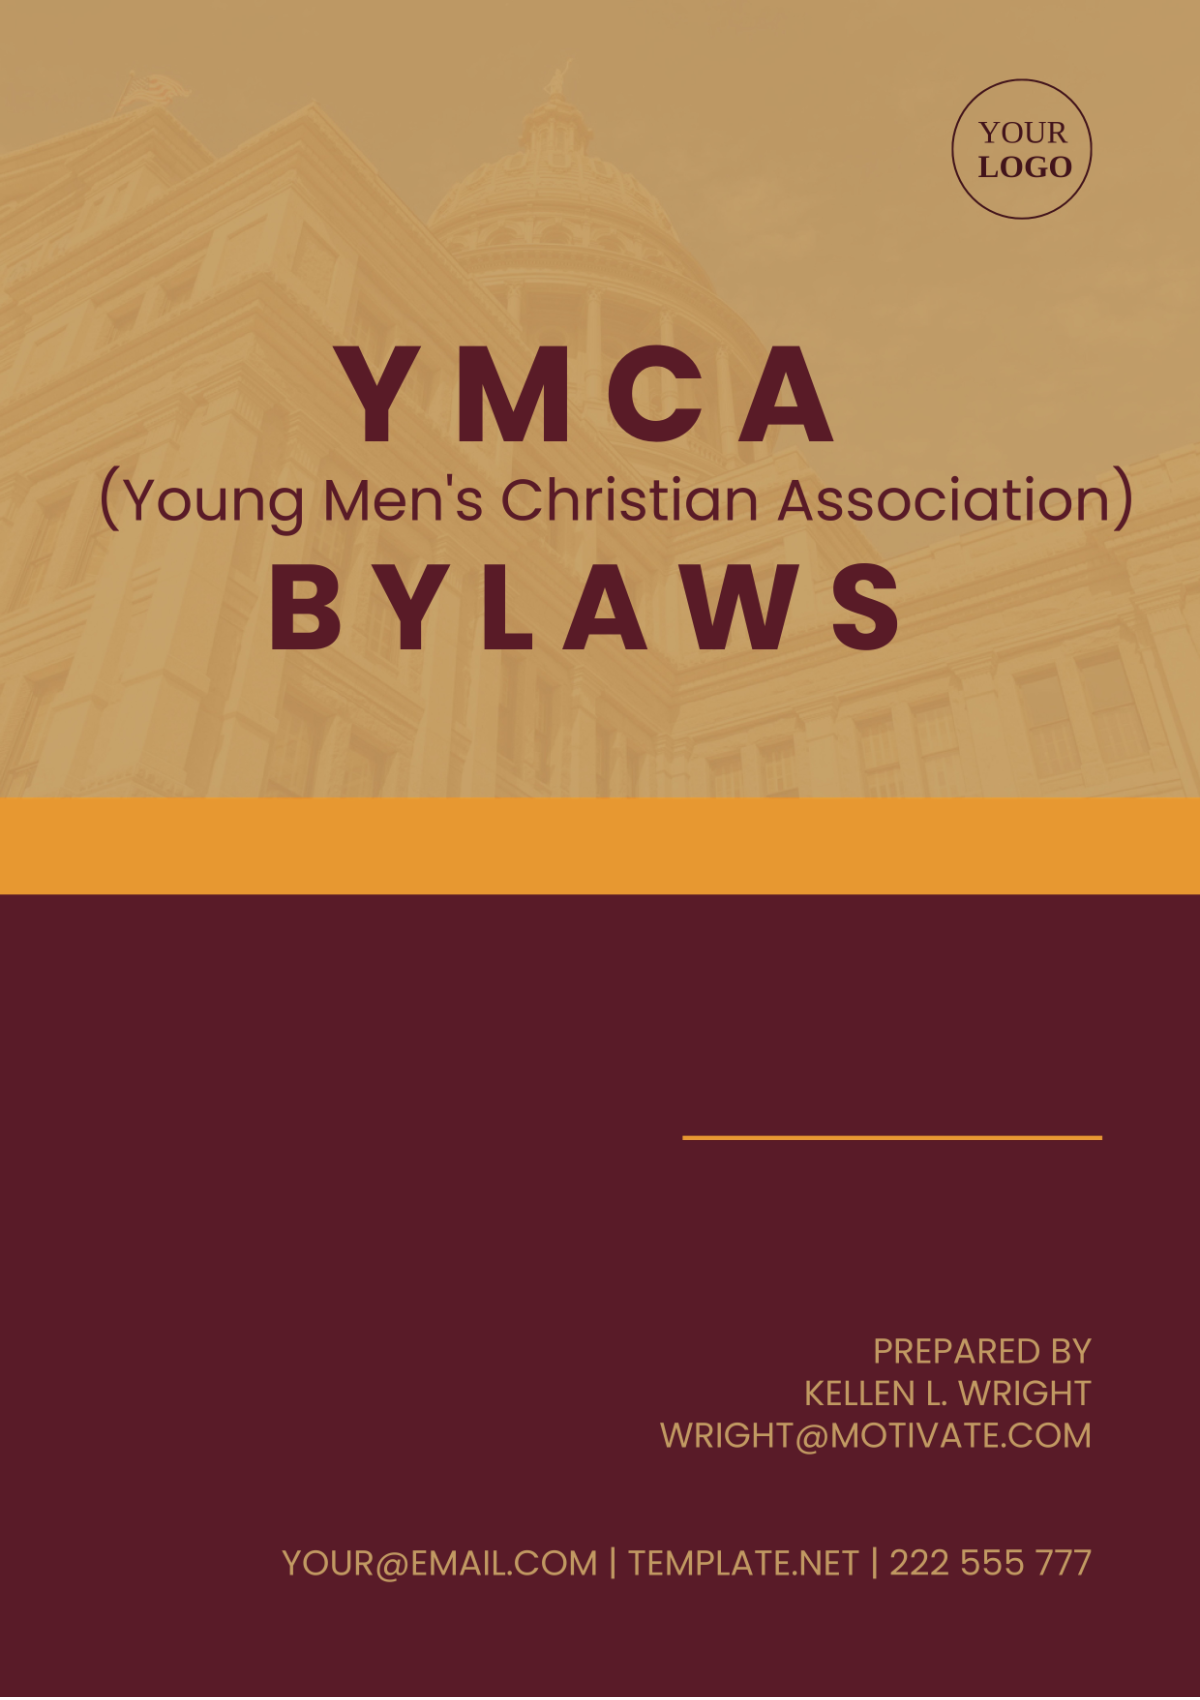 Ymca(Young Men's Christian Association) Bylaws Template